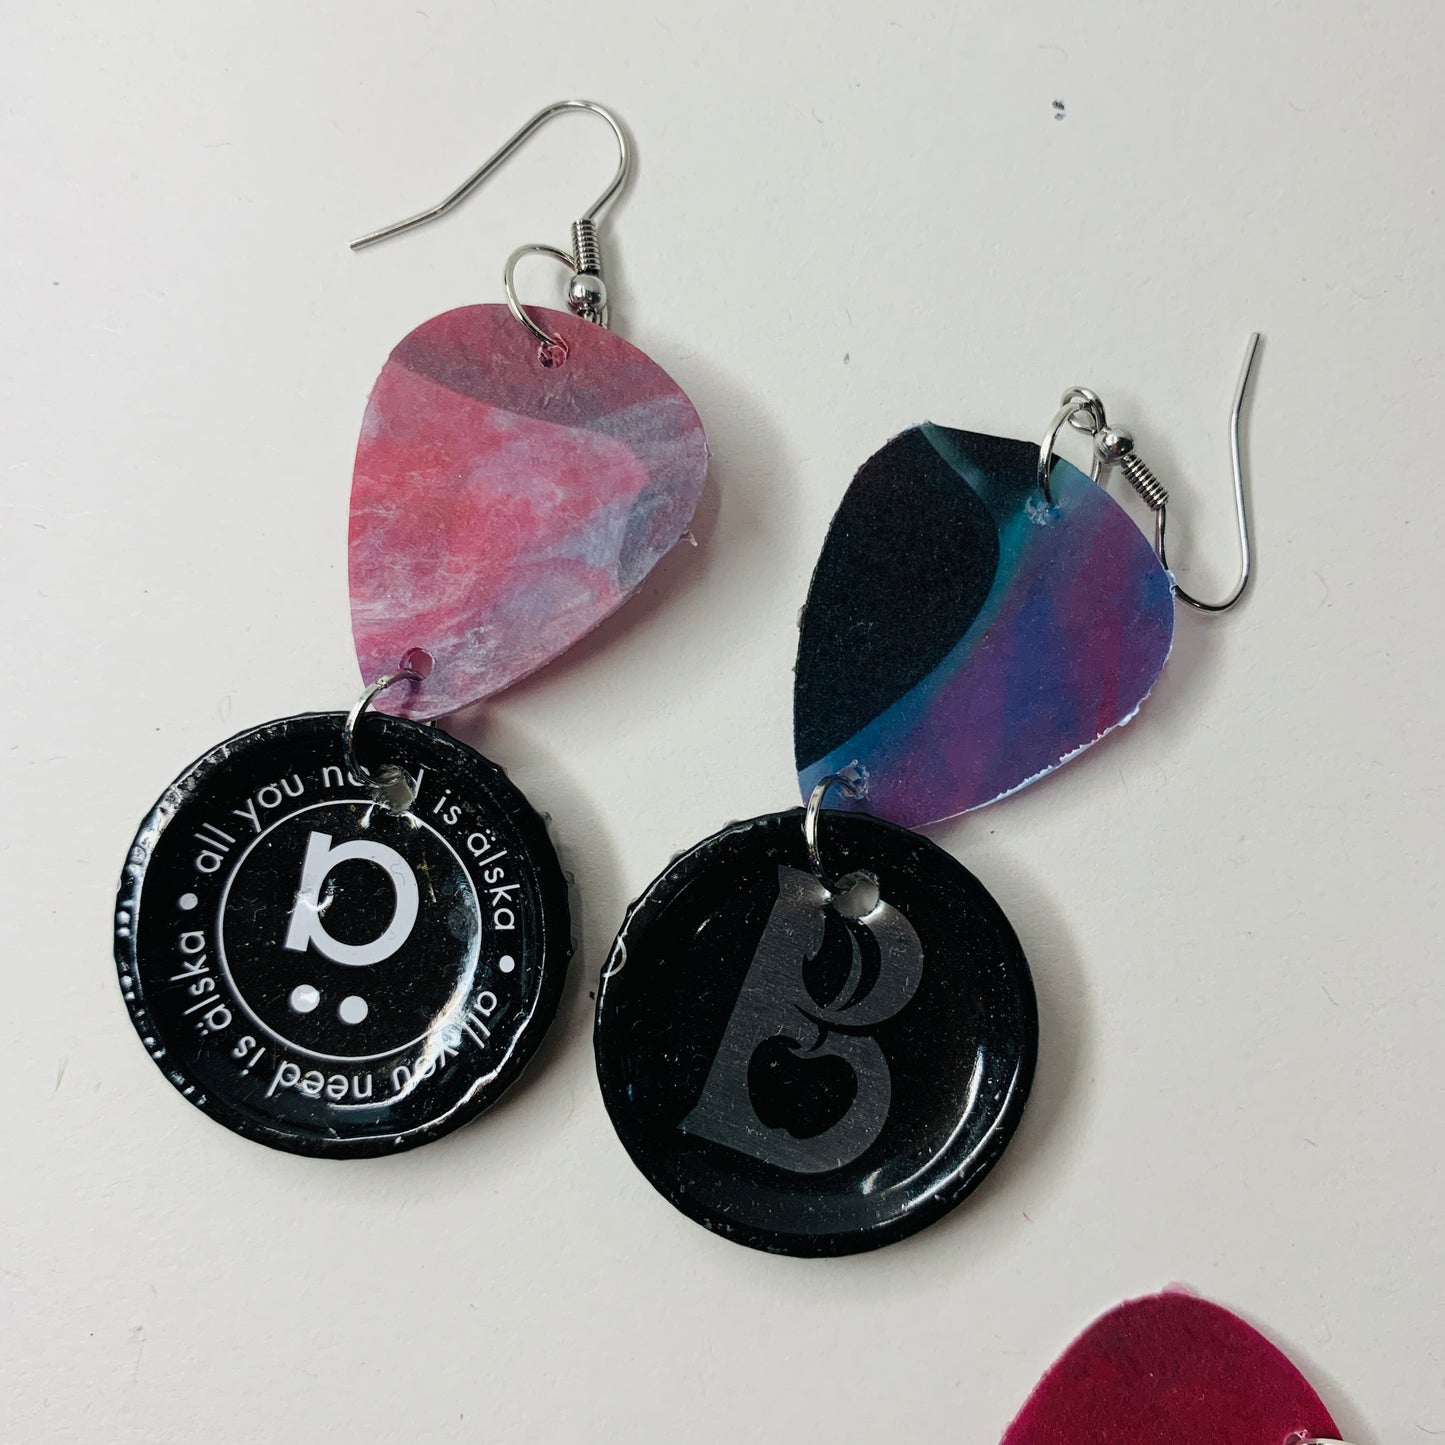 Cheers! Recycled Bottle Top and Cap earrings